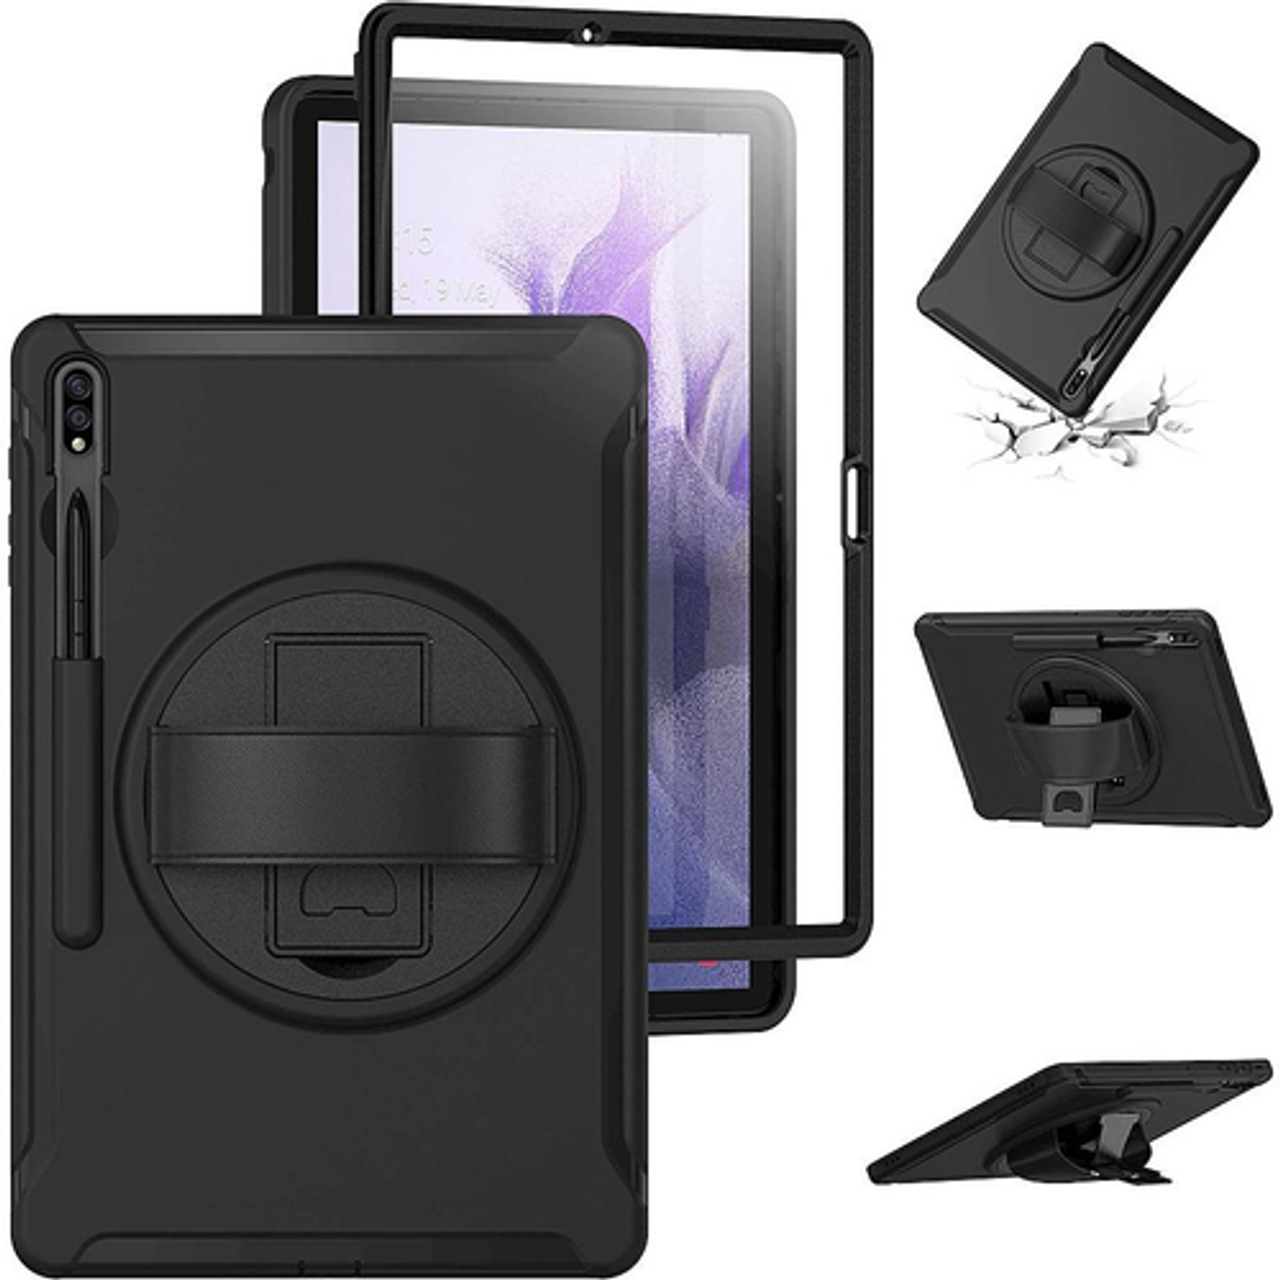 SaharaCase - PROTECTION Hand Strap Series Case for Samsung Galaxy Tab S7 FE - Black